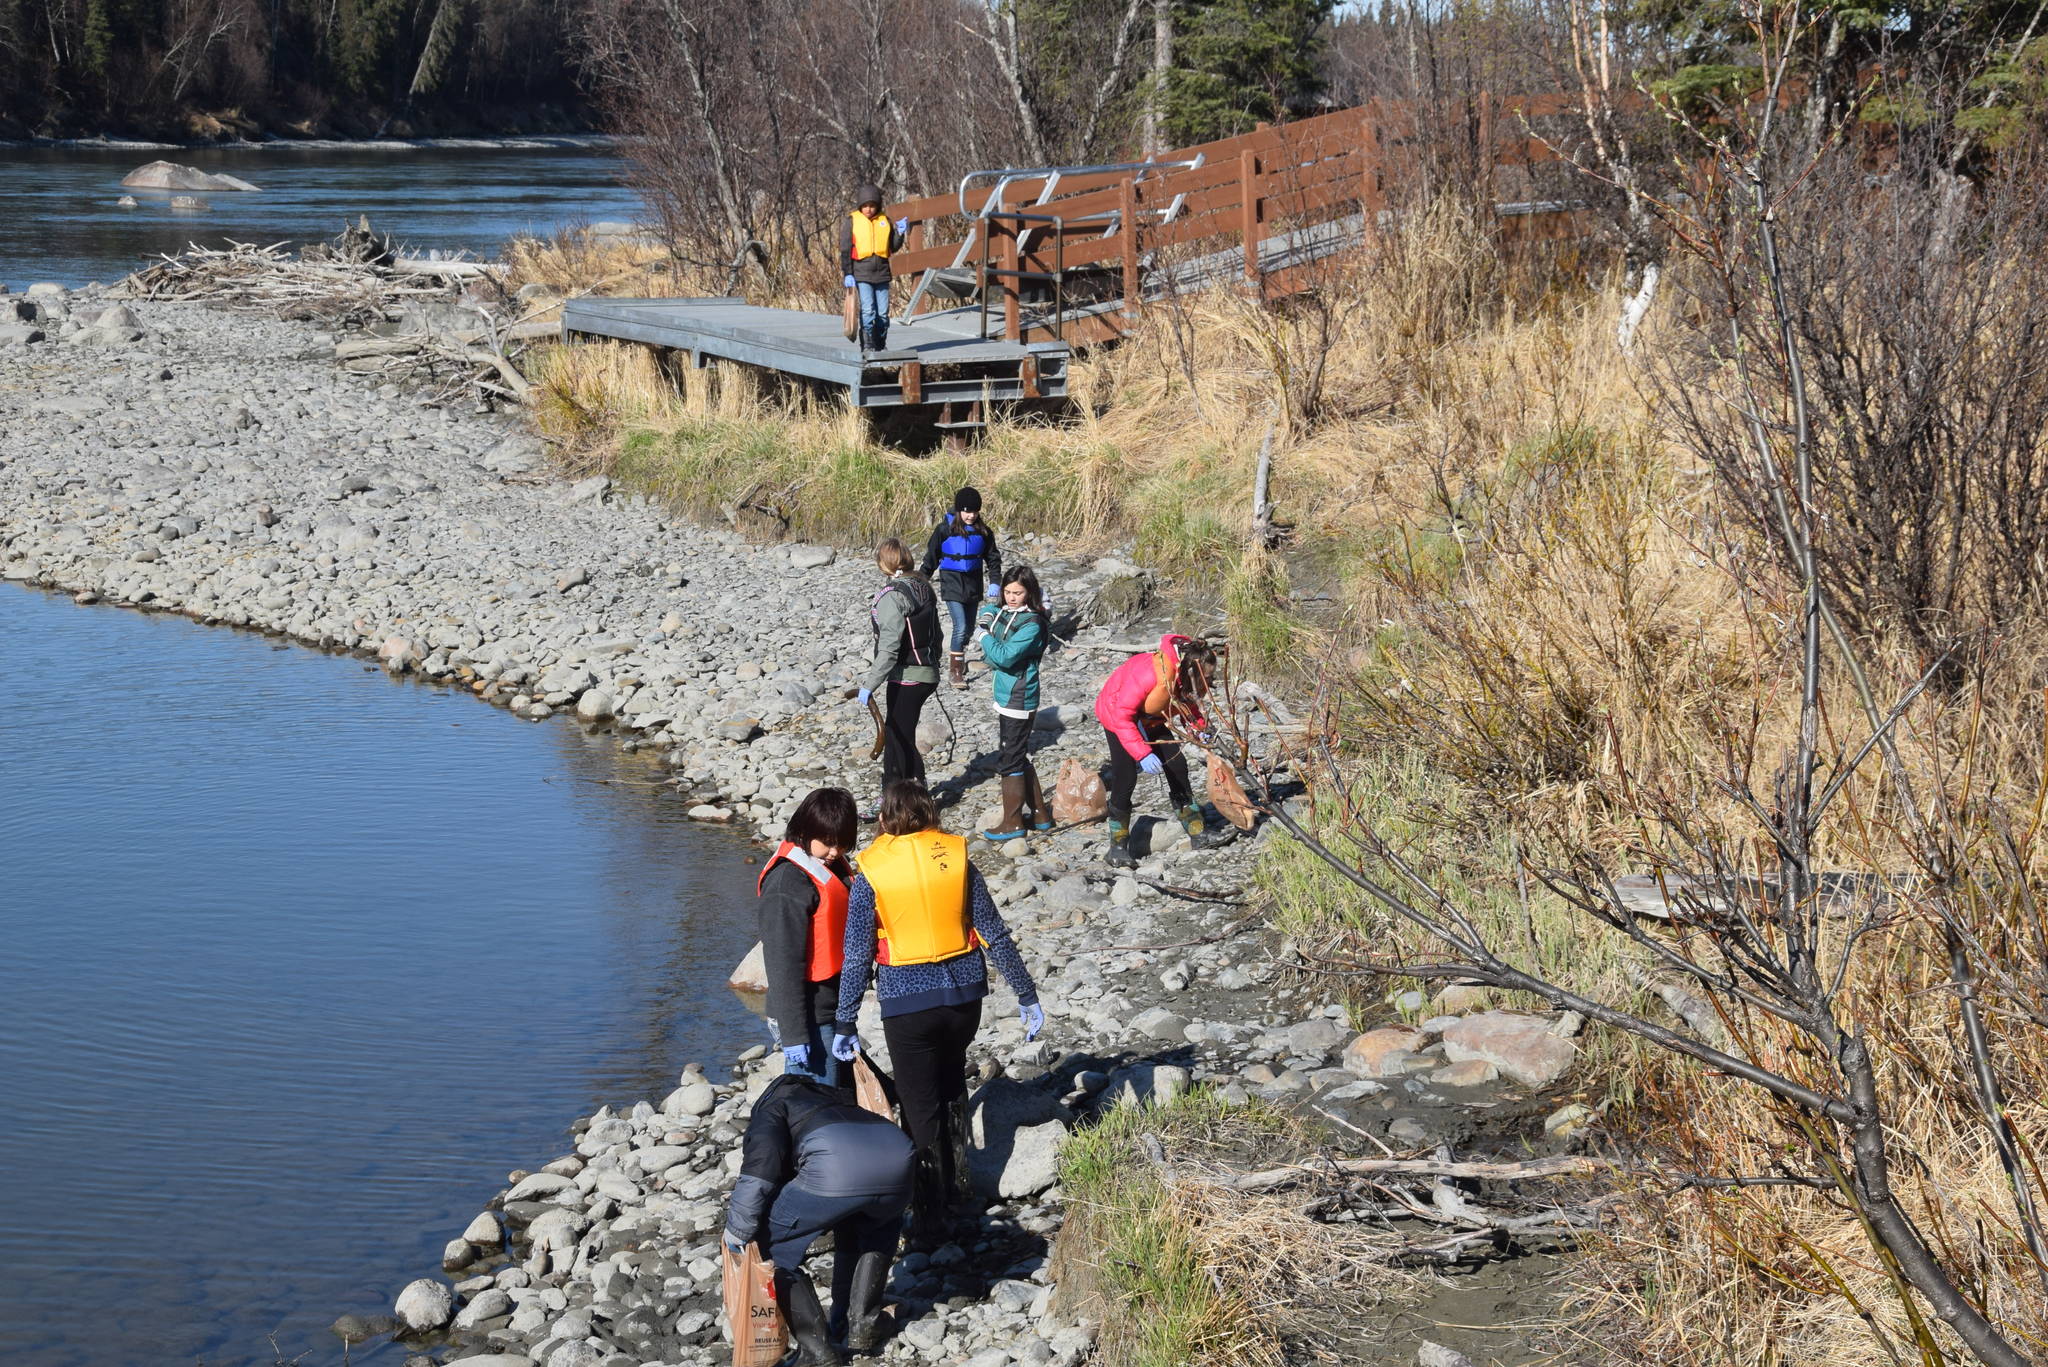 Students from Redoubt Elementary pick up trash along the river during the 6th Annual Kids Kenai River Spring Cleanup at Swiftwater Park in Soldotna, Alaska on May 3, 2019. (Photo by Brian Mazurek/Peninsula Clarion)